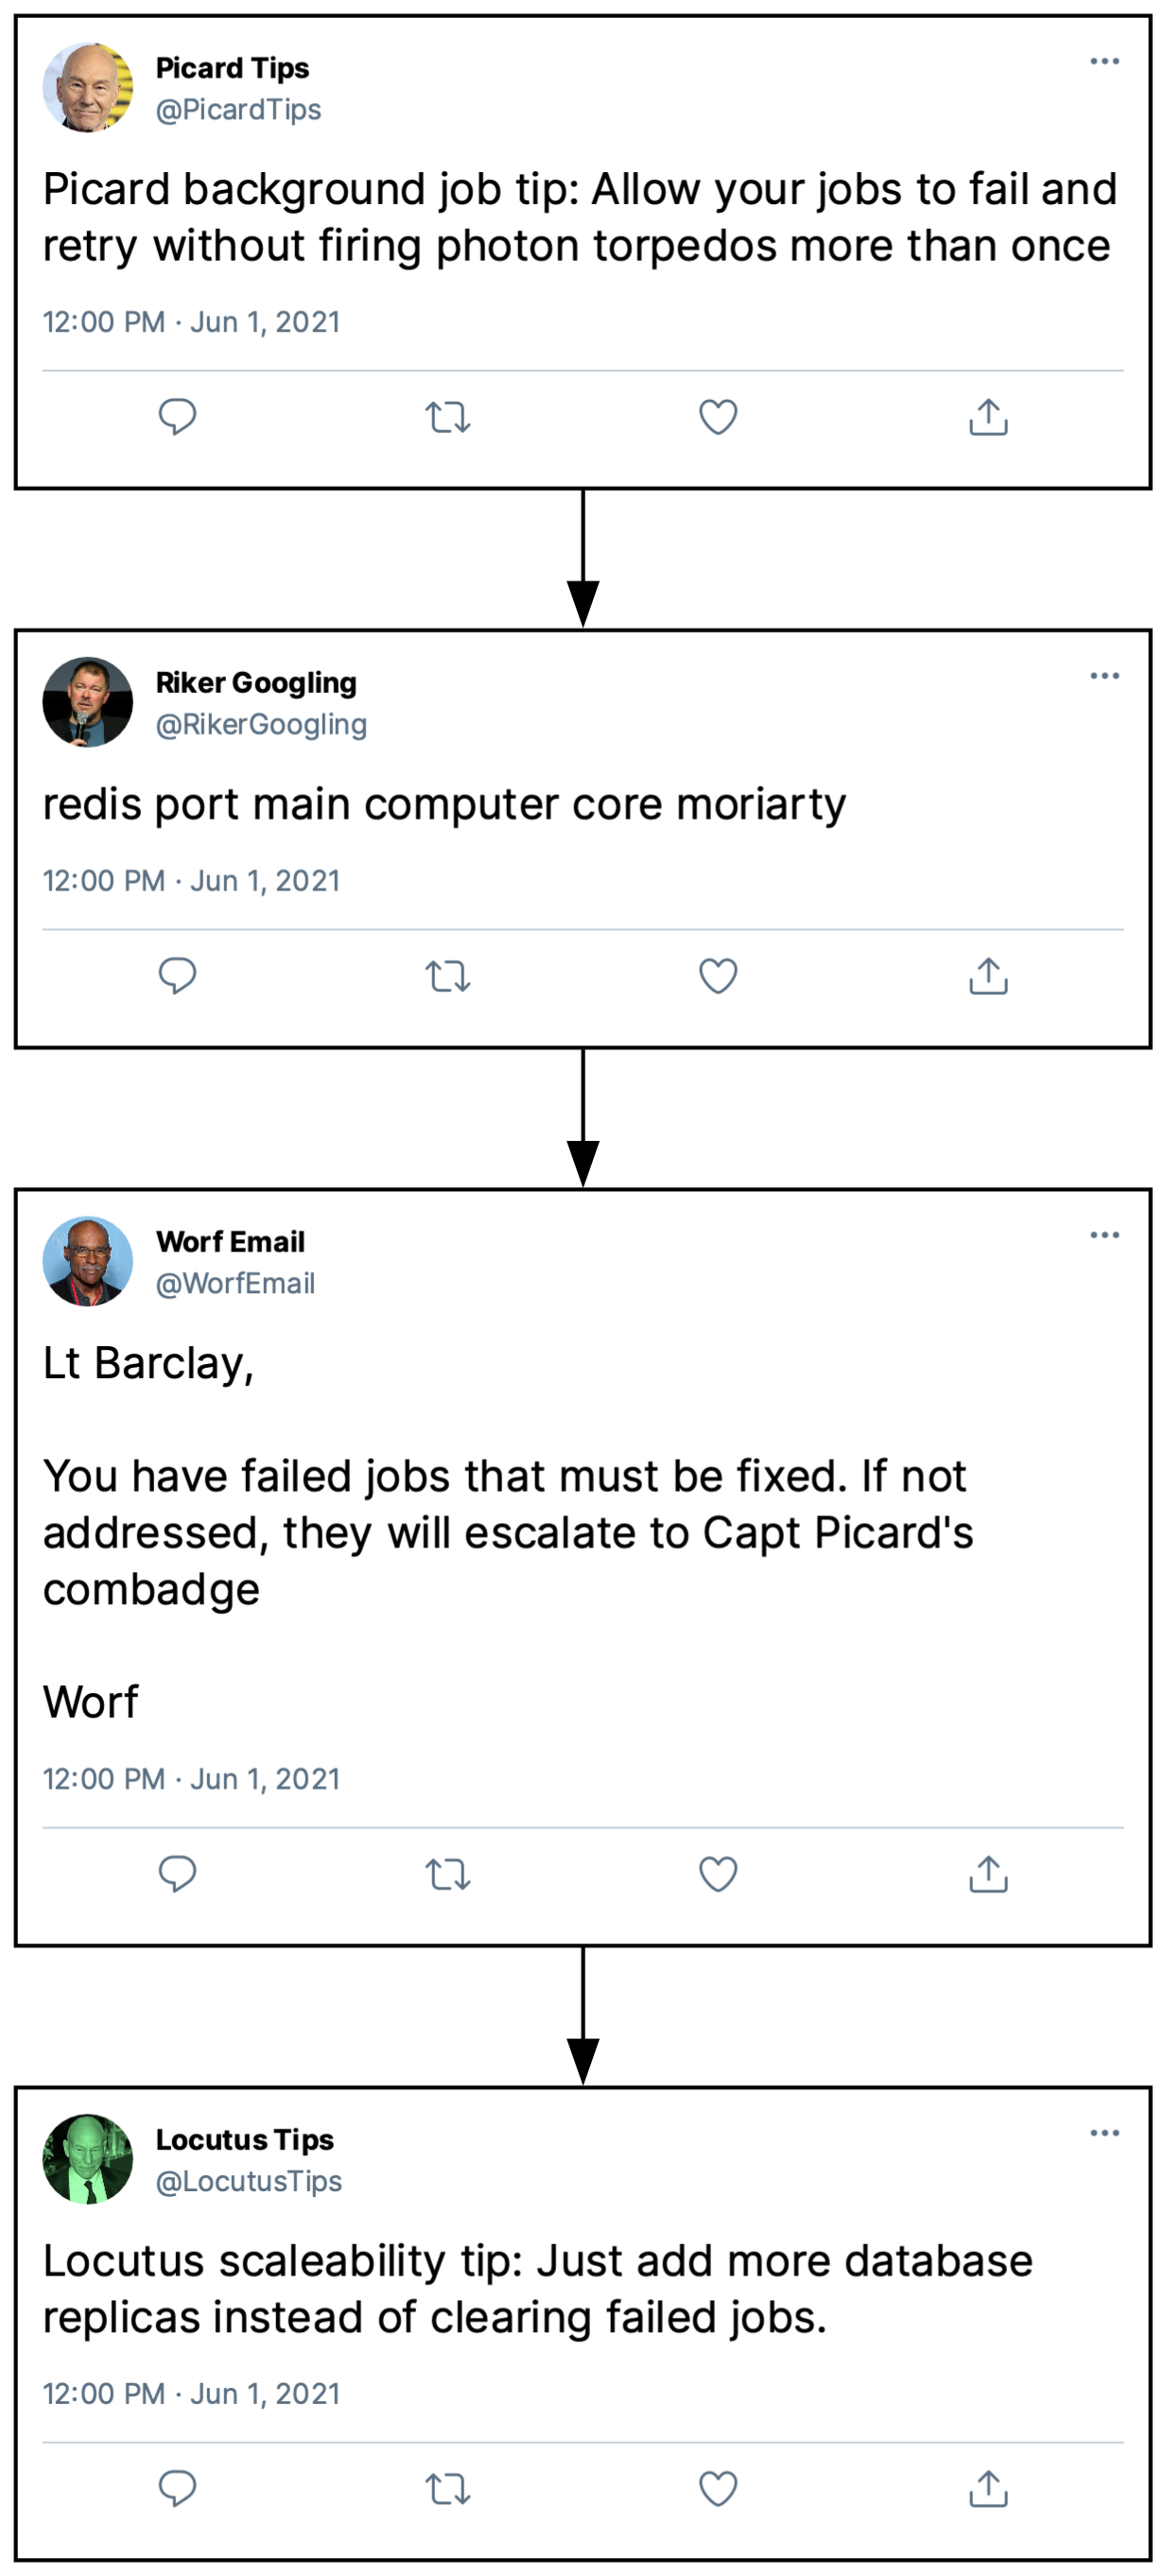 Four fake Mastodon posts with arrows from one to the next in order. First is from user @PicardTips that says 'Picard background job tip: Allow your jobs to fail and retry without firing photon torpedos more than once'. Second is user @RikerGoogling that says 'redis port main computer core moriarty'. Third is user @WorfEmail that says 'Lt Barclay, You have failed jobs that must be fixed. If not addressed, they will escalate to Capt Picard's combadge Worf'. Fourth is user @LocutusTips that says 'Locutus scaleability tip: Just add more database replicas instead of clearing failed jobs.'